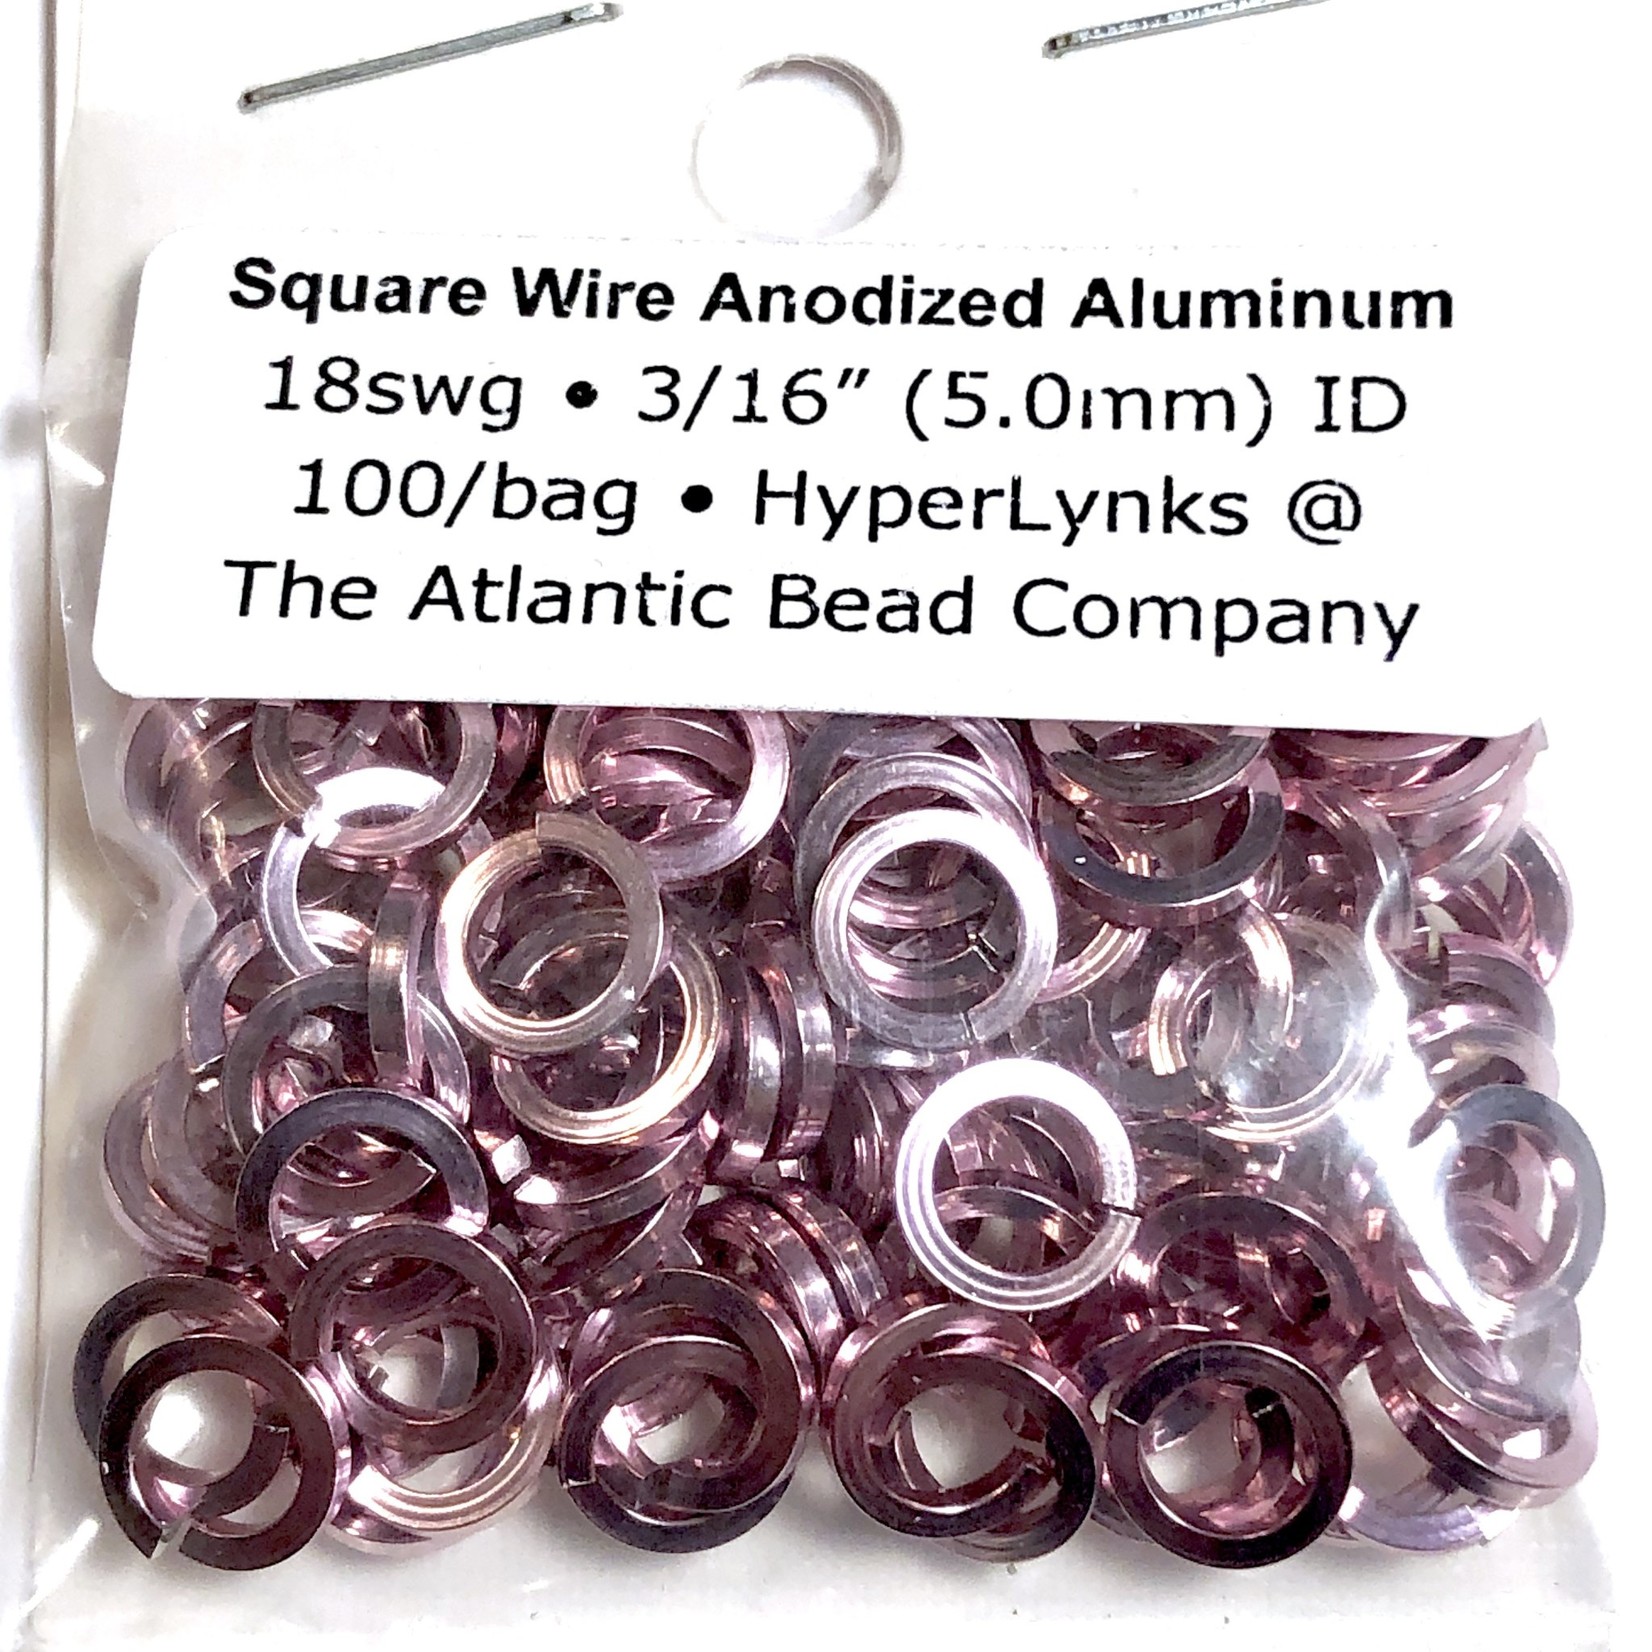 Hyperlinks Sq Wire Anodized Alum Rings Pink 18ga 3/16" 100pcs